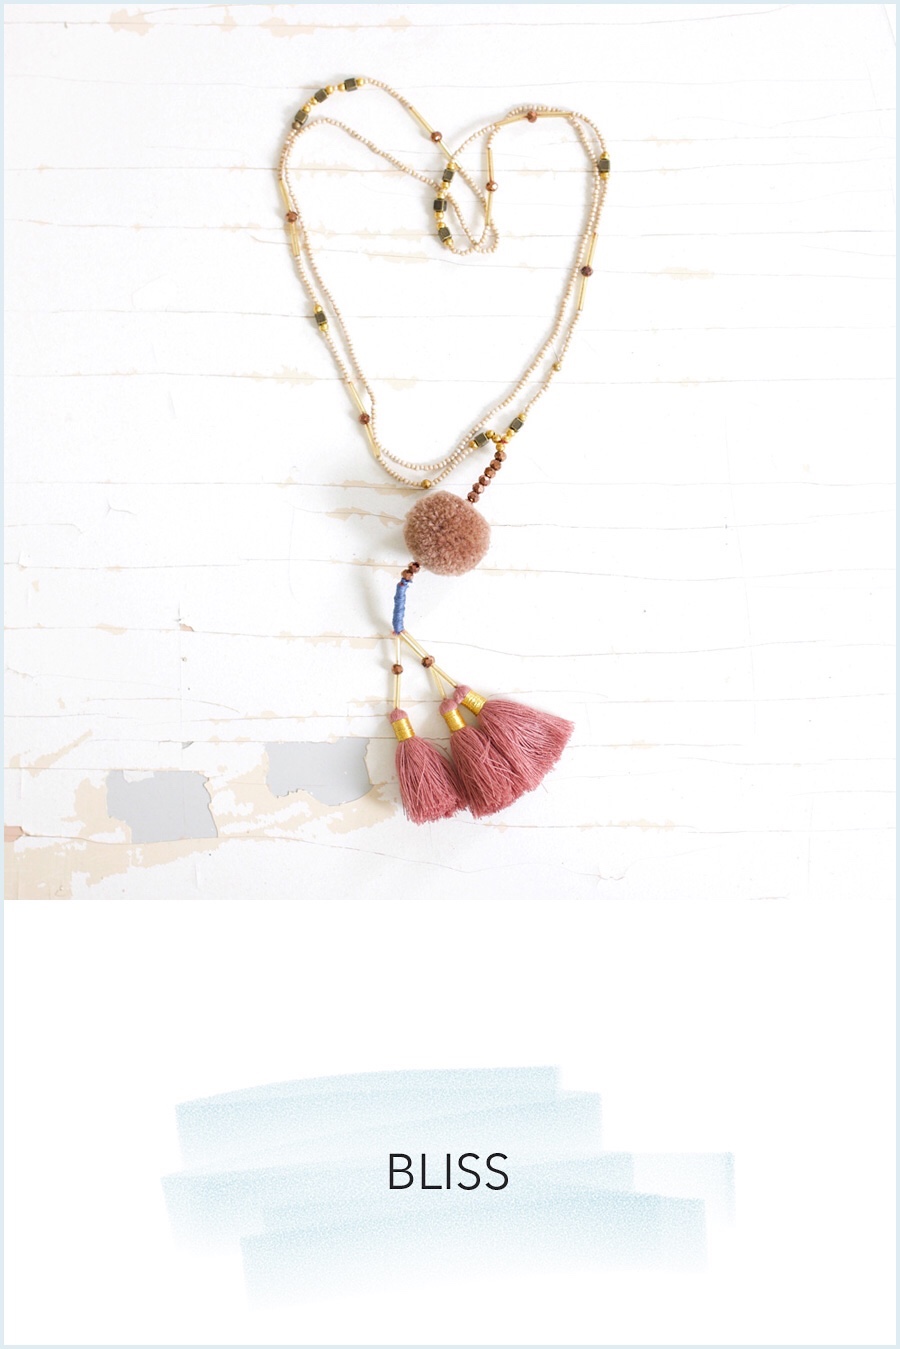 Shop gorgeous handmade jewelry! Handcrafted in Bali, Indonesia and now available to you via DESIGN THE LIFE YOU WANT TO LIVE by Lynne Knowlton !